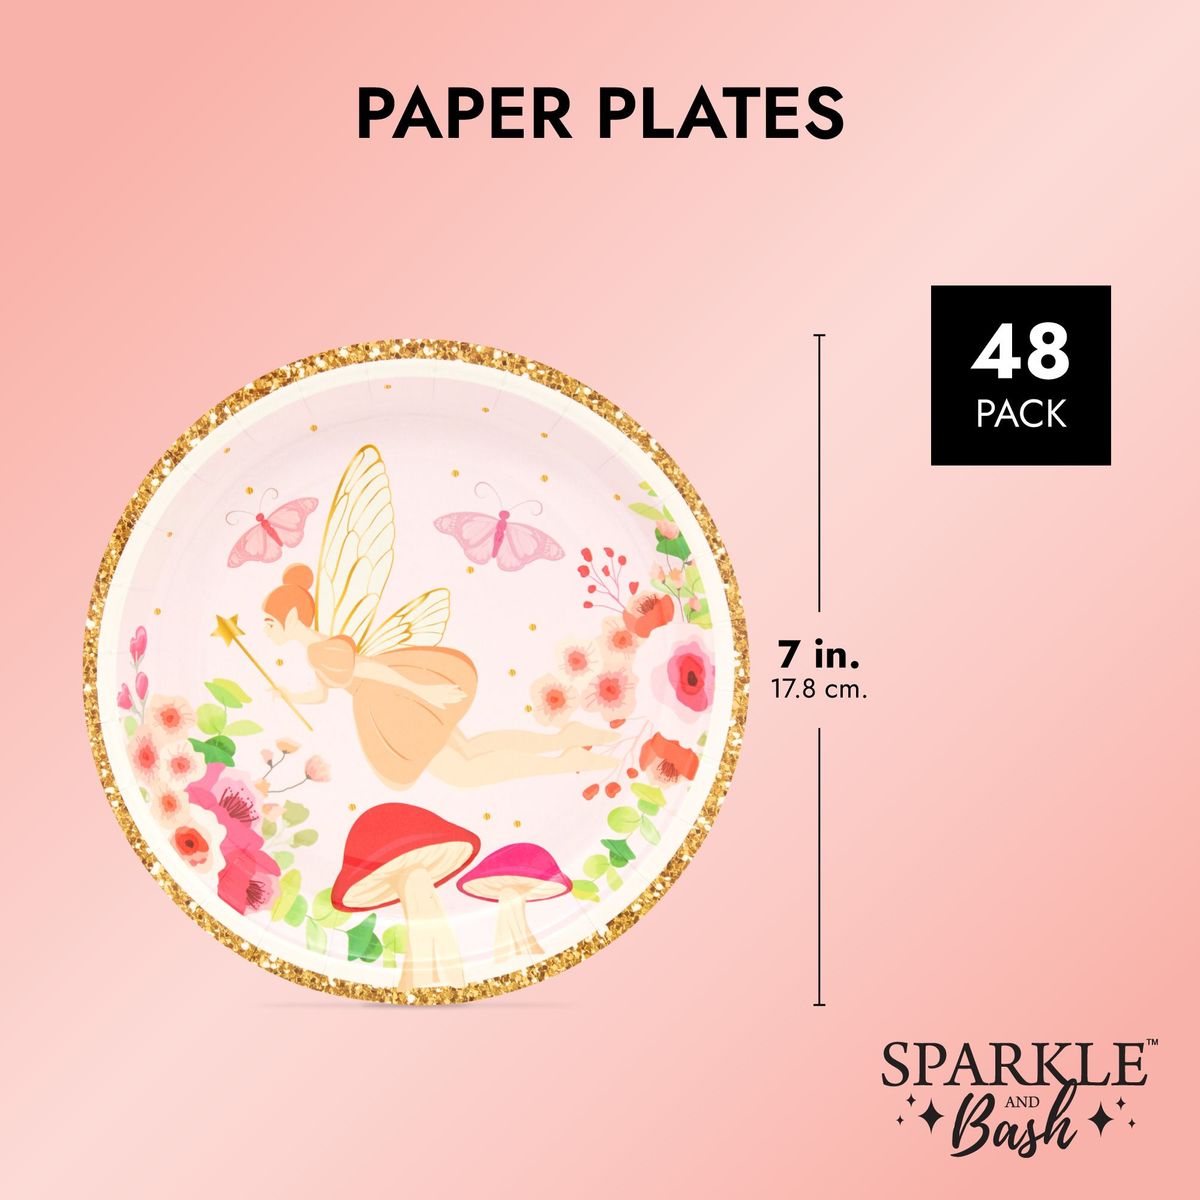 Fairy Tea Party Paper Plates for Girls Floral Birthday Supplies (7 In, 48 Pack) - image 3 of 7